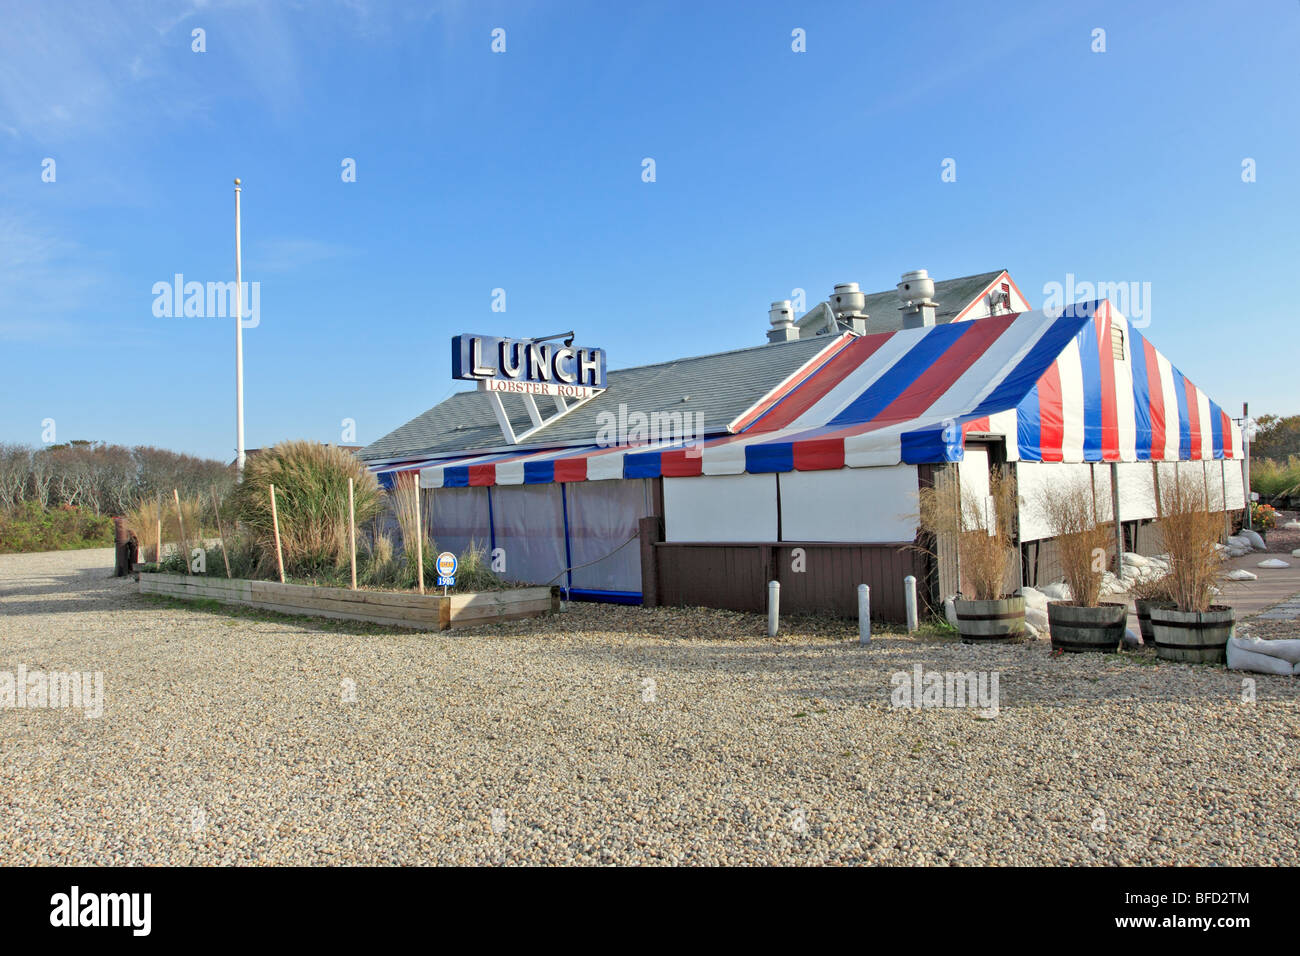 "Lunch", a popular seafood restaurant in the Hamptons, closed for the season, Napeague, near Montauk, Long Island, NY Stock Photo